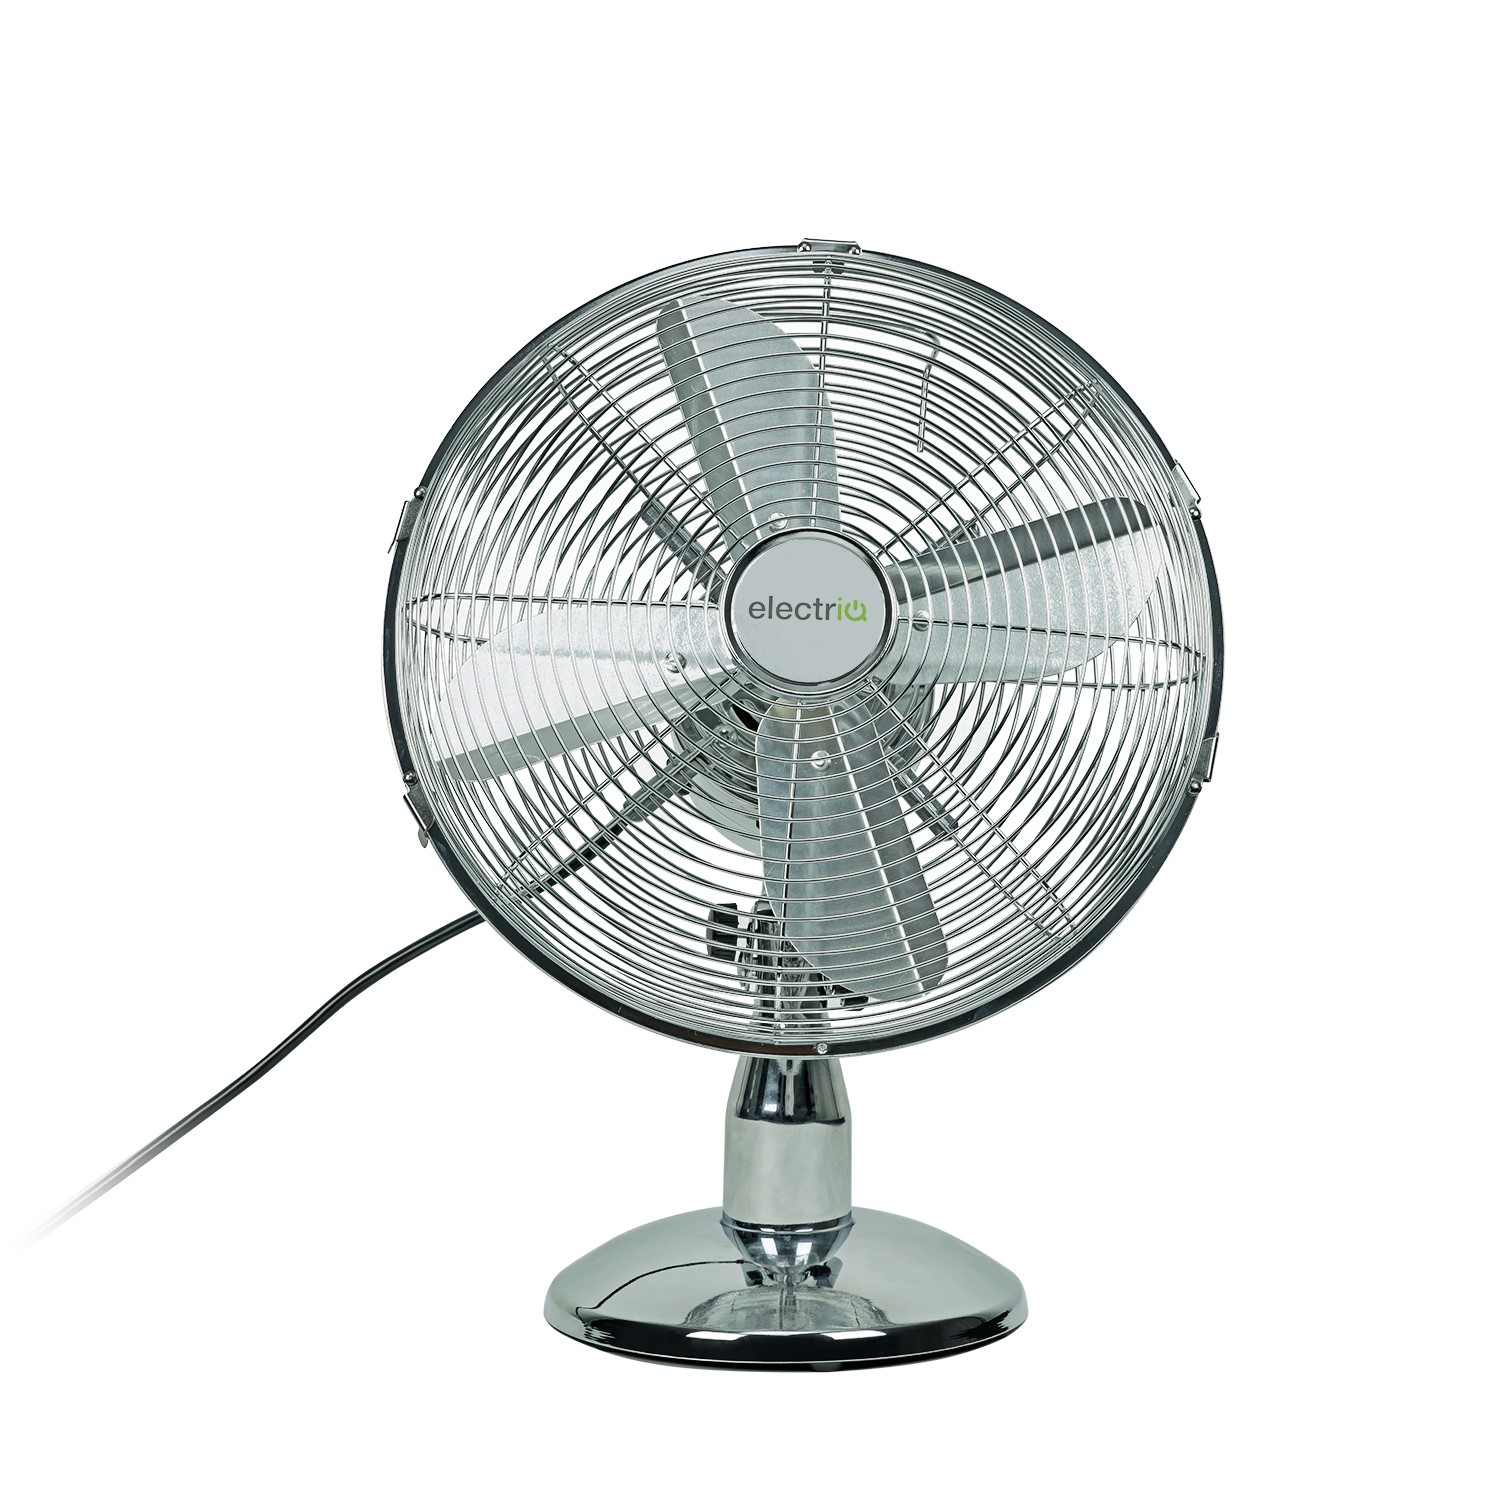 electriQ 12 Inch Chrome Desk Fan With Oscillating Function